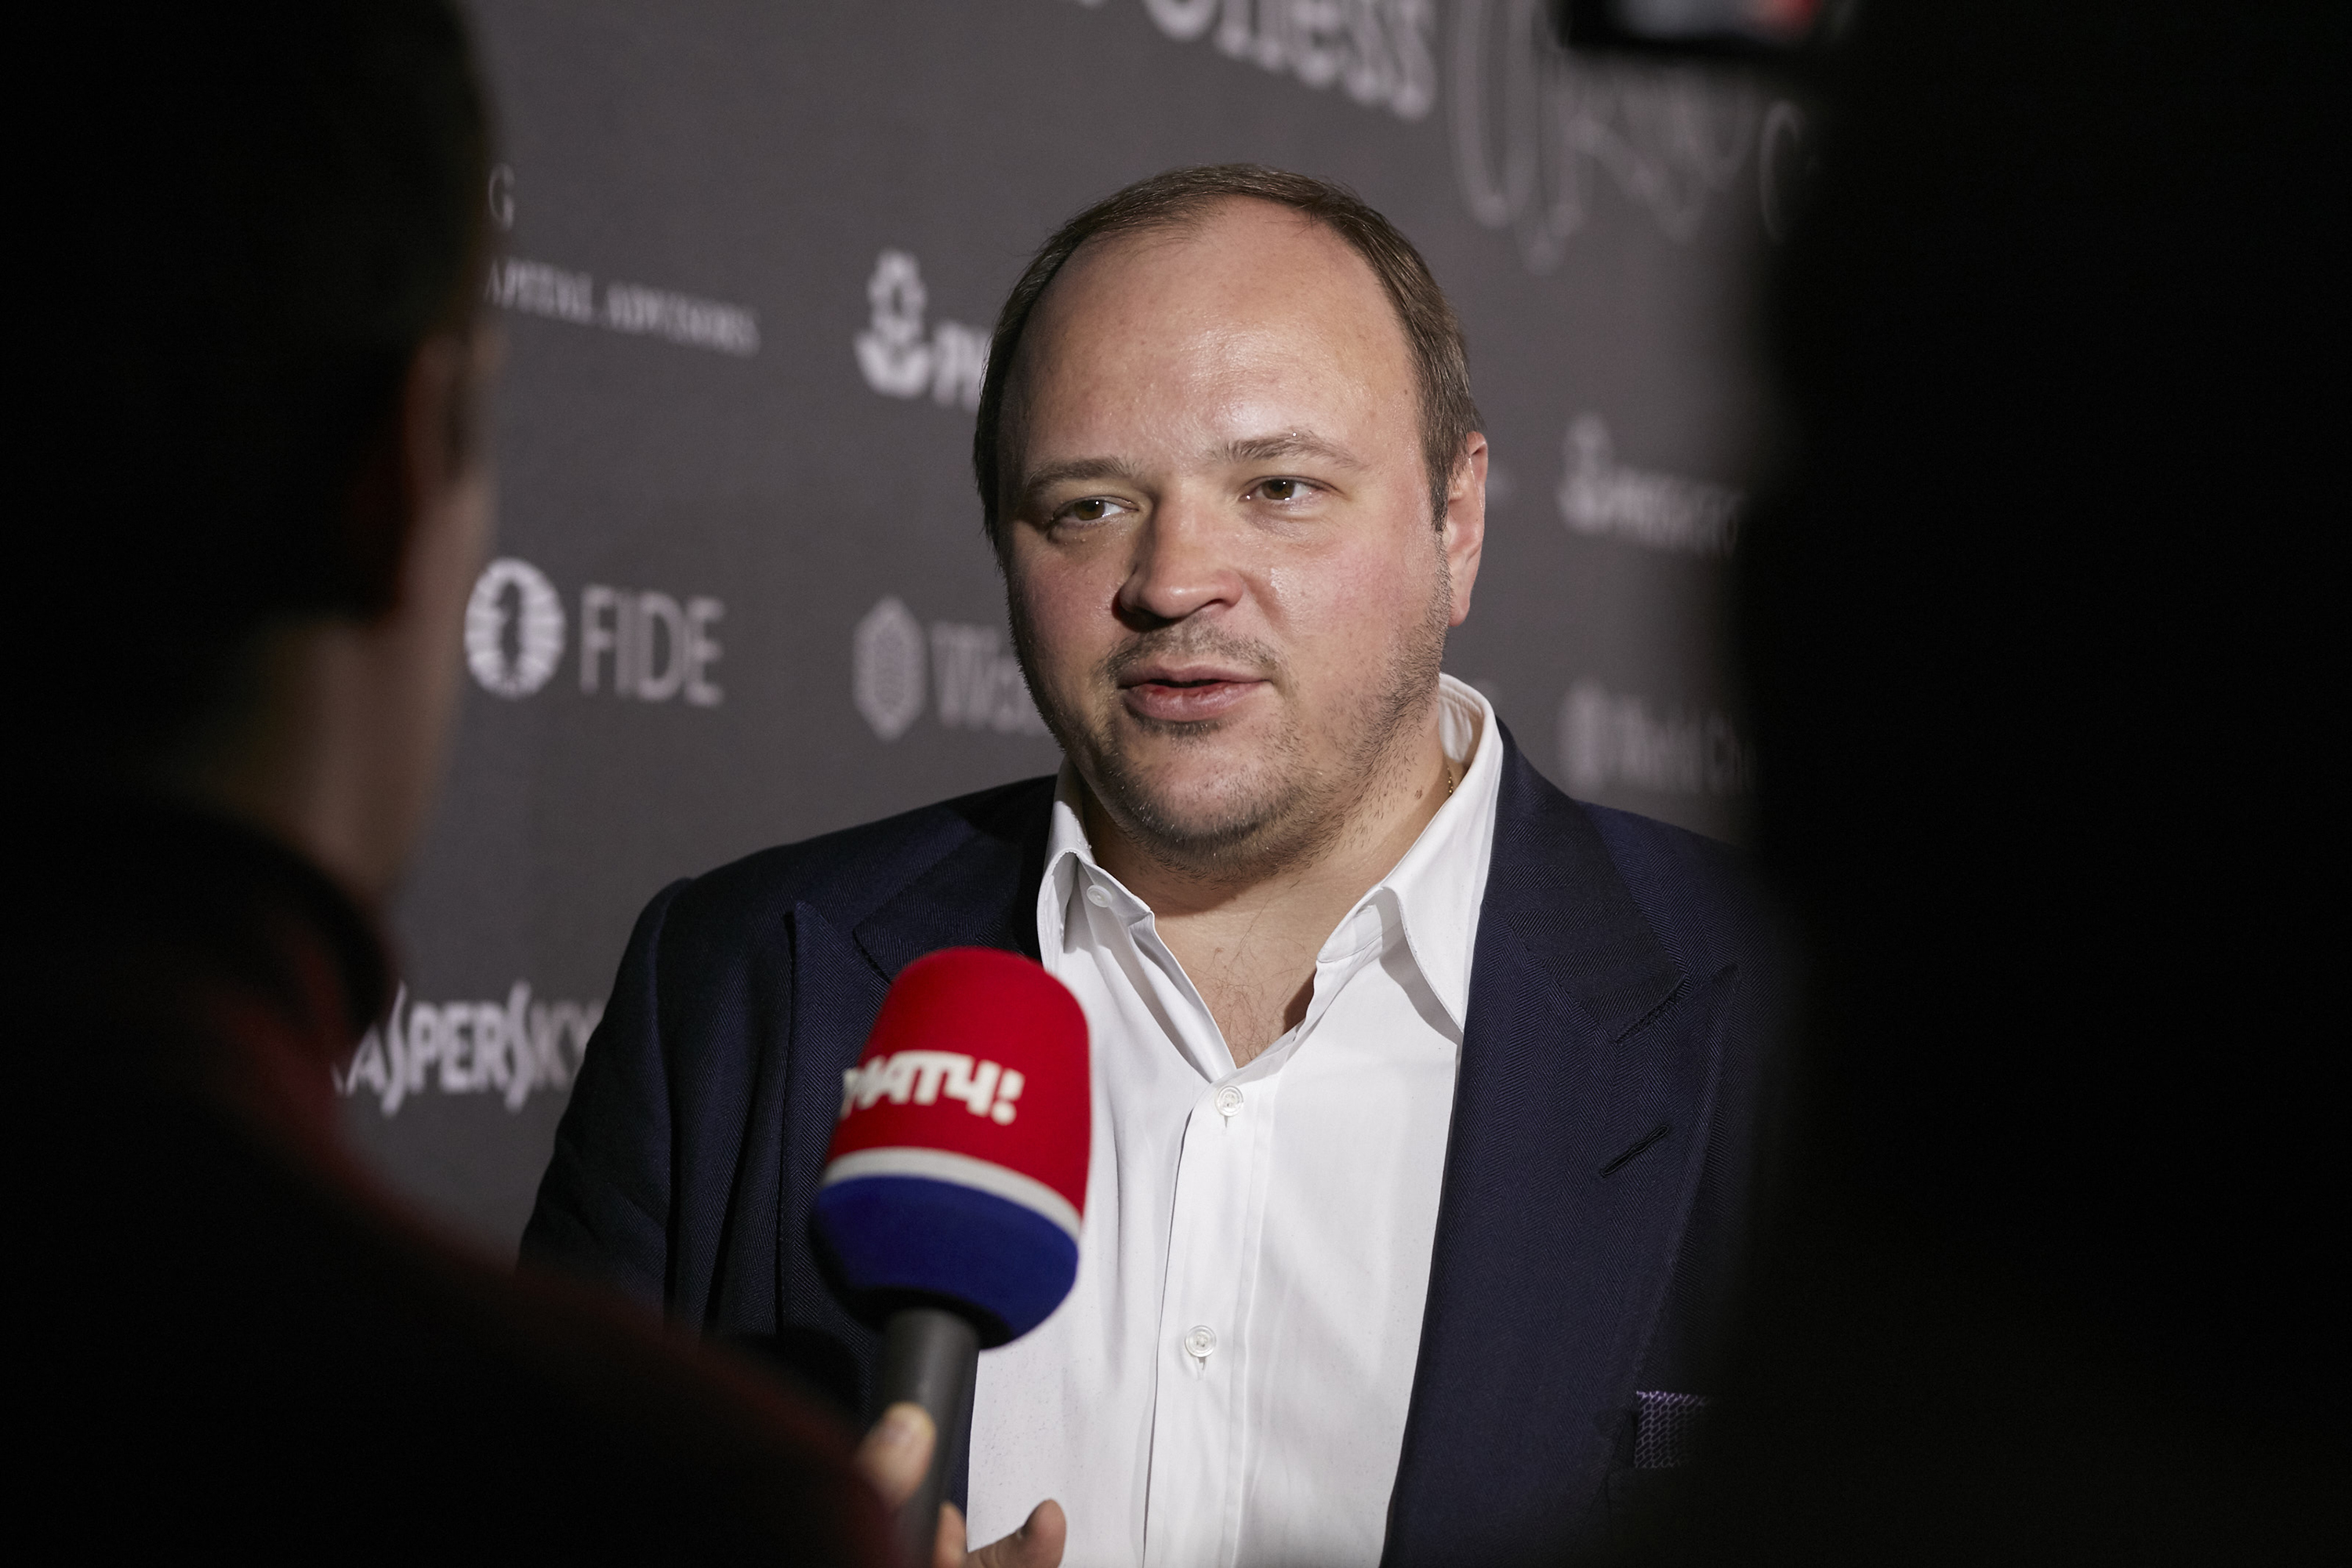 Andrey Grigoryevich Guryev, chief executive officer of PhosAgro, speaks in an interview at the opening press conference during the World Chess Tournament on March 9, 2018 in Berlin, Germany.